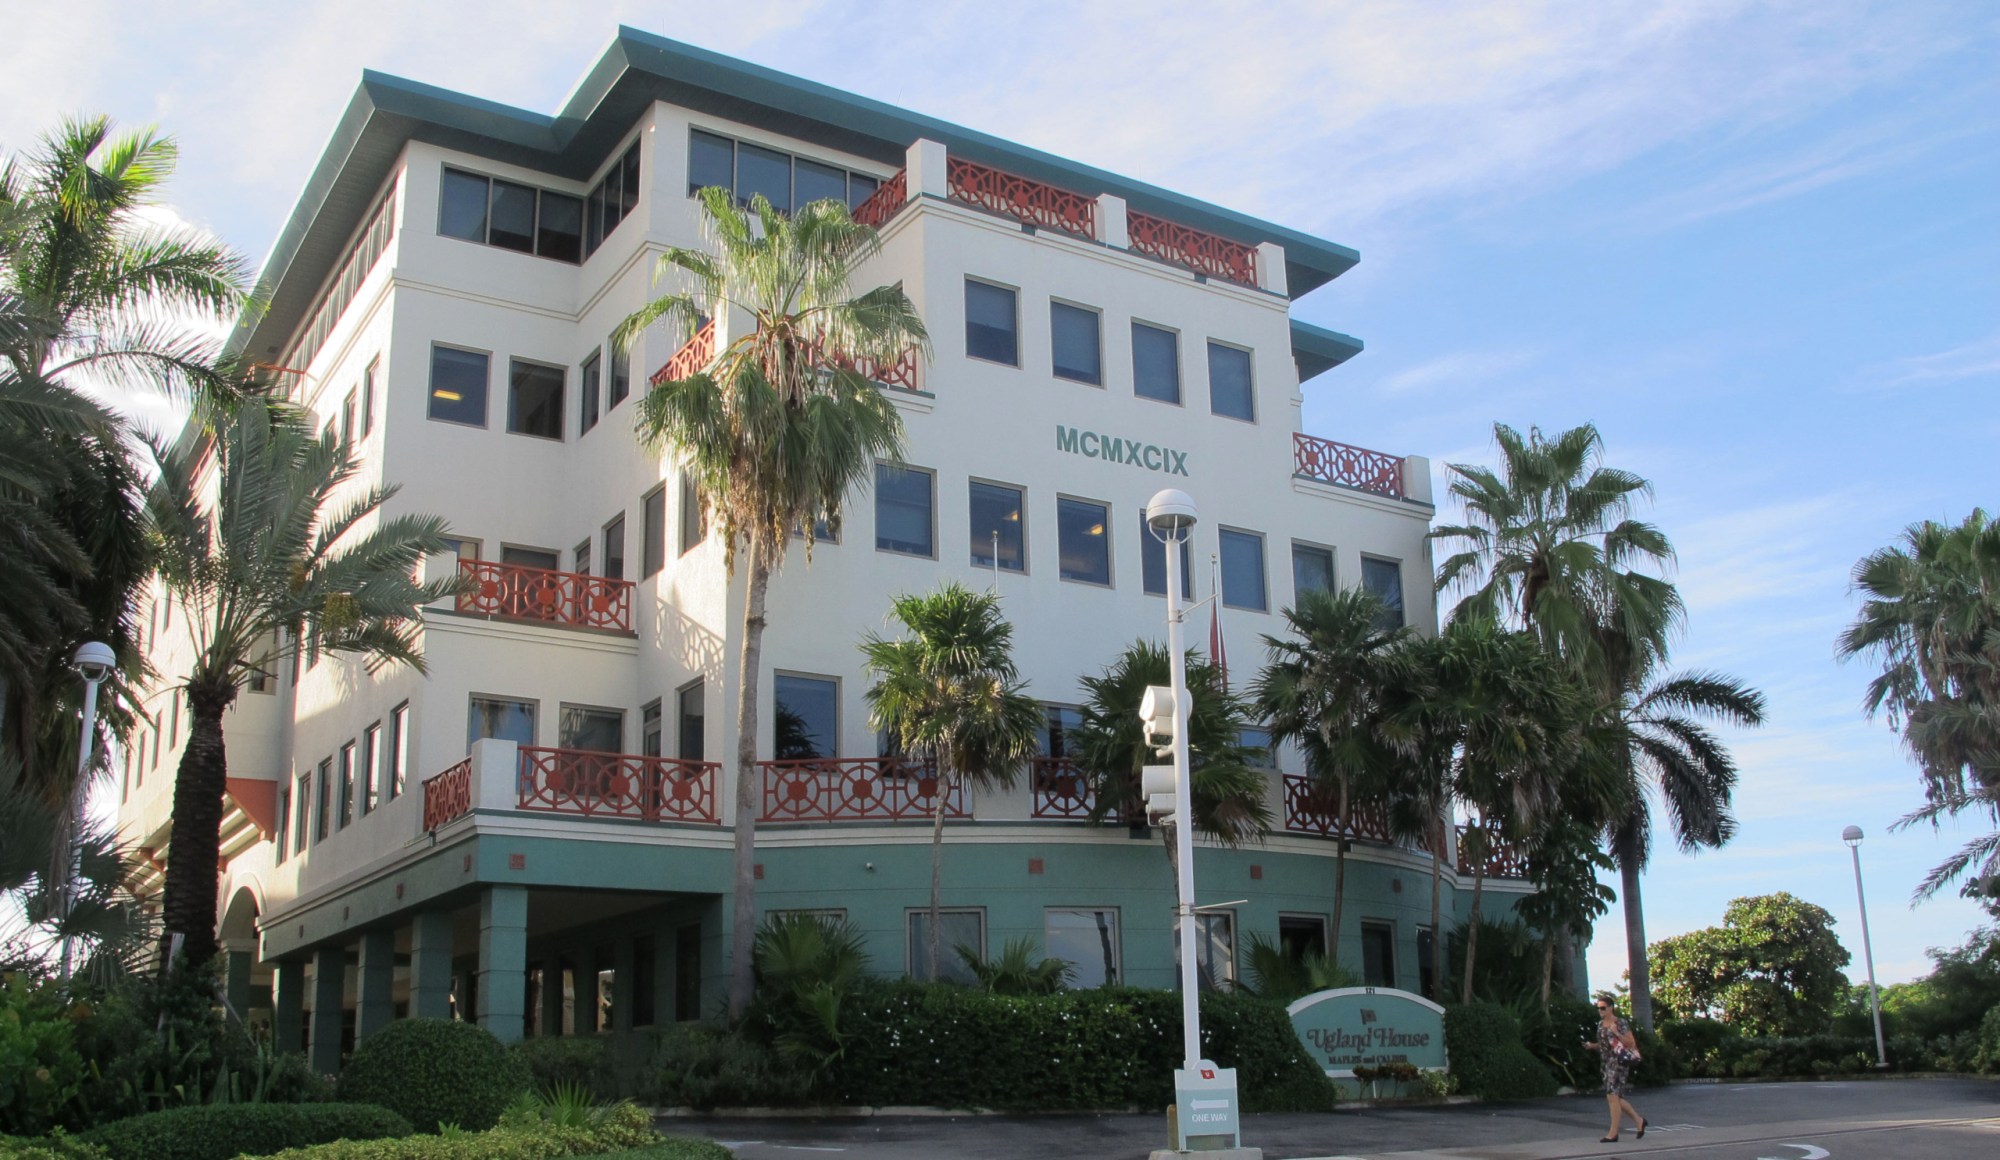 The Ugland House in George Town on Grand Cayman Island is the registered office for thousands of global companies. It has helped build the Cayman Islands into one of the most famous offshore banking centers. (AP/David McFadden)